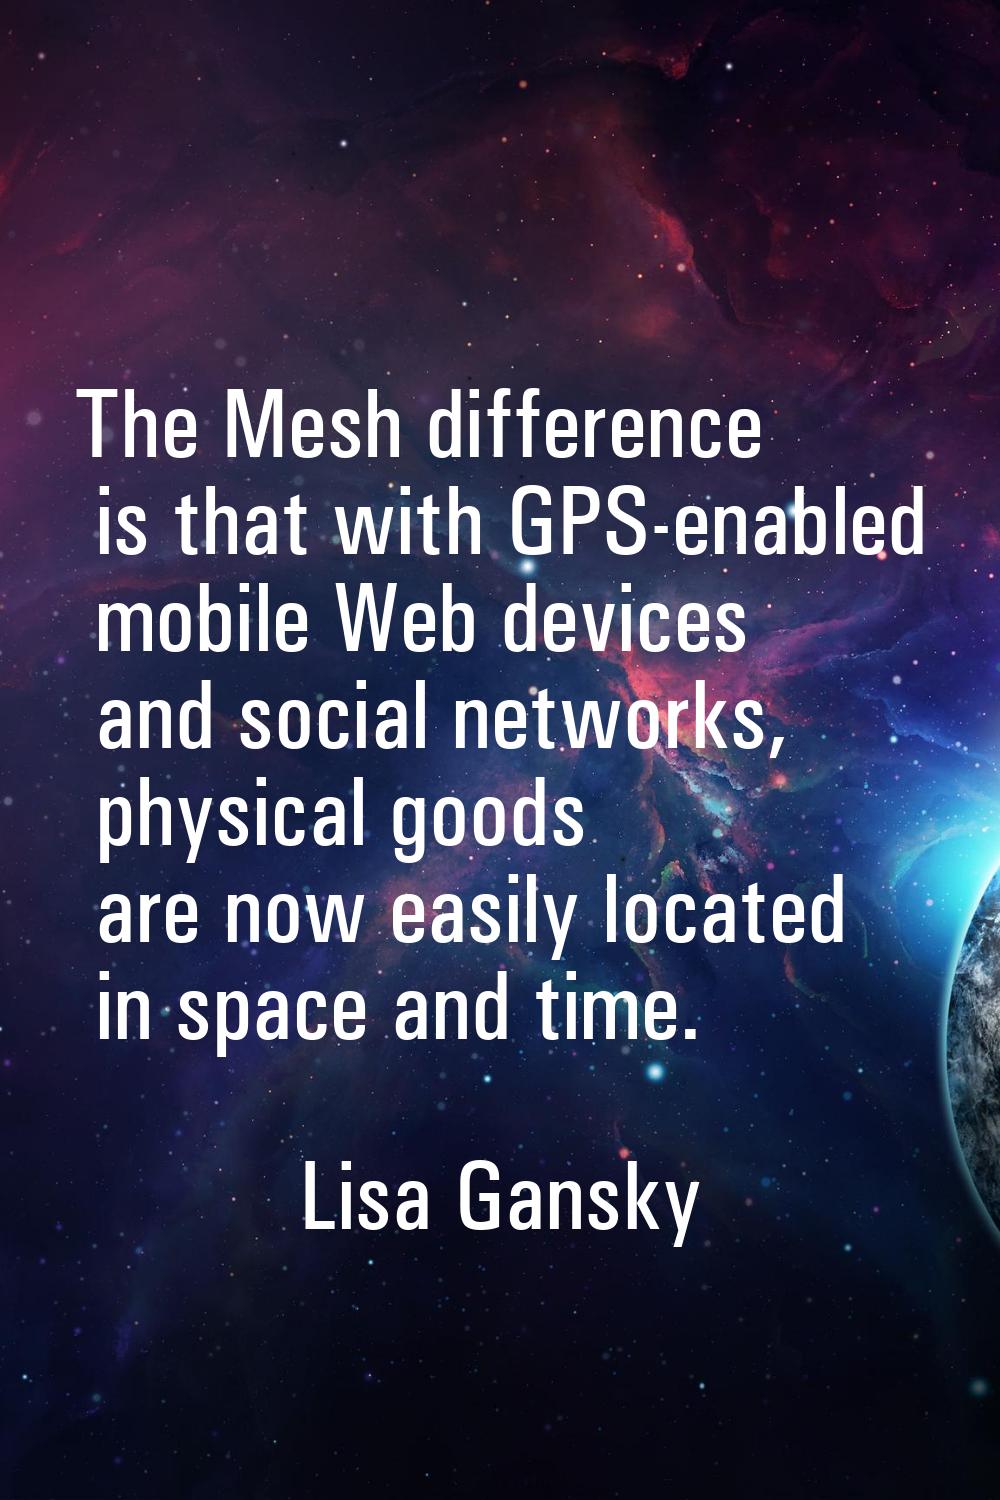 The Mesh difference is that with GPS-enabled mobile Web devices and social networks, physical goods